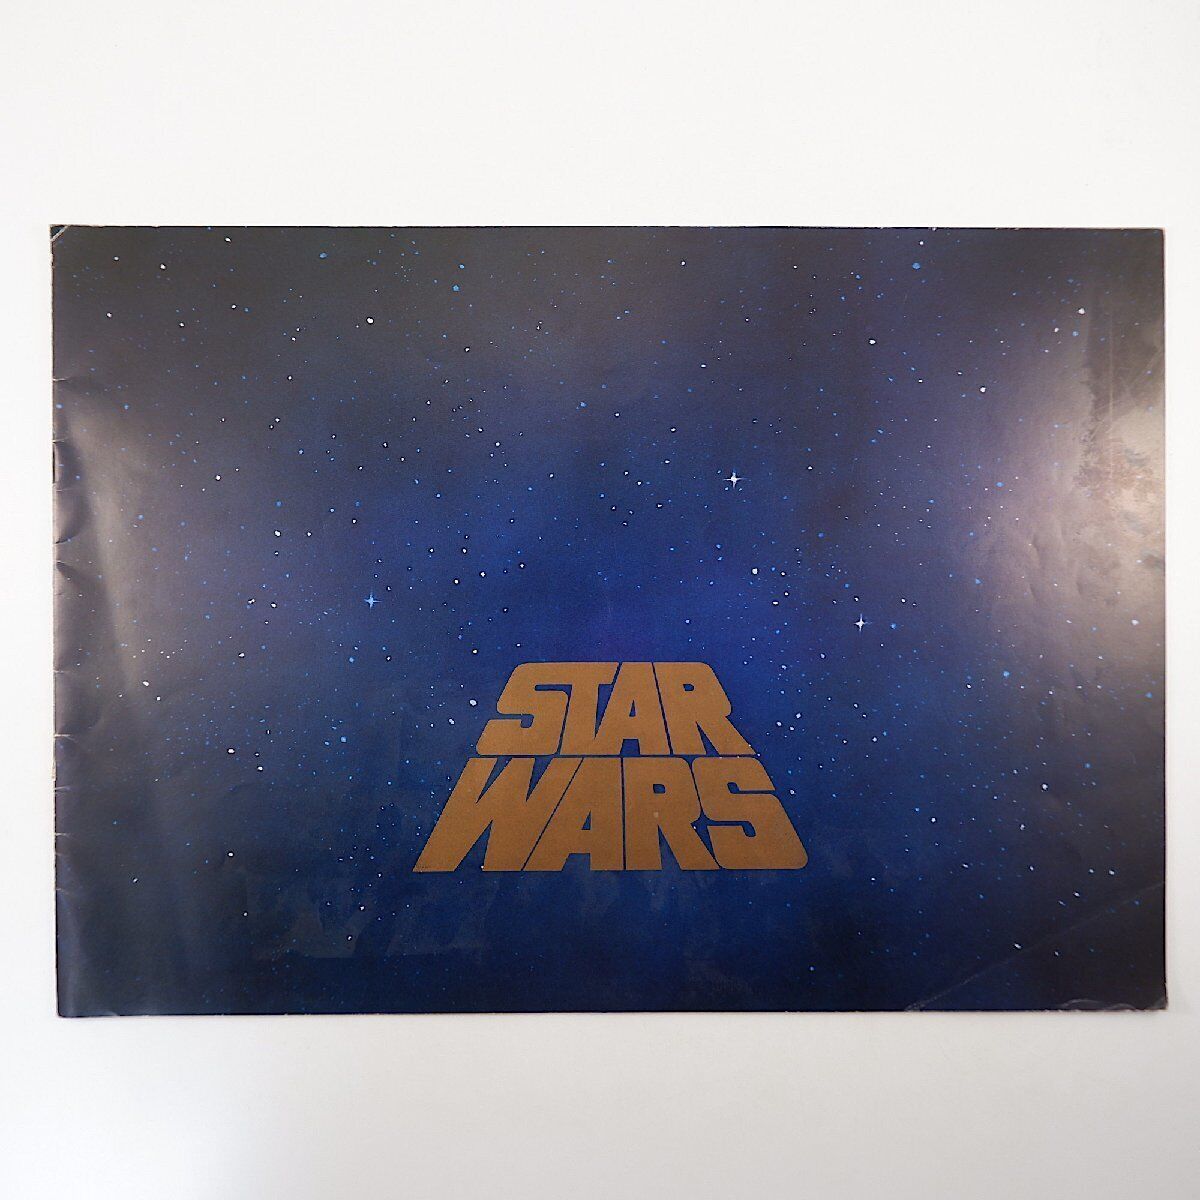 Press sheet  1978 theatrical release movie  STAR WARS  promotional materials